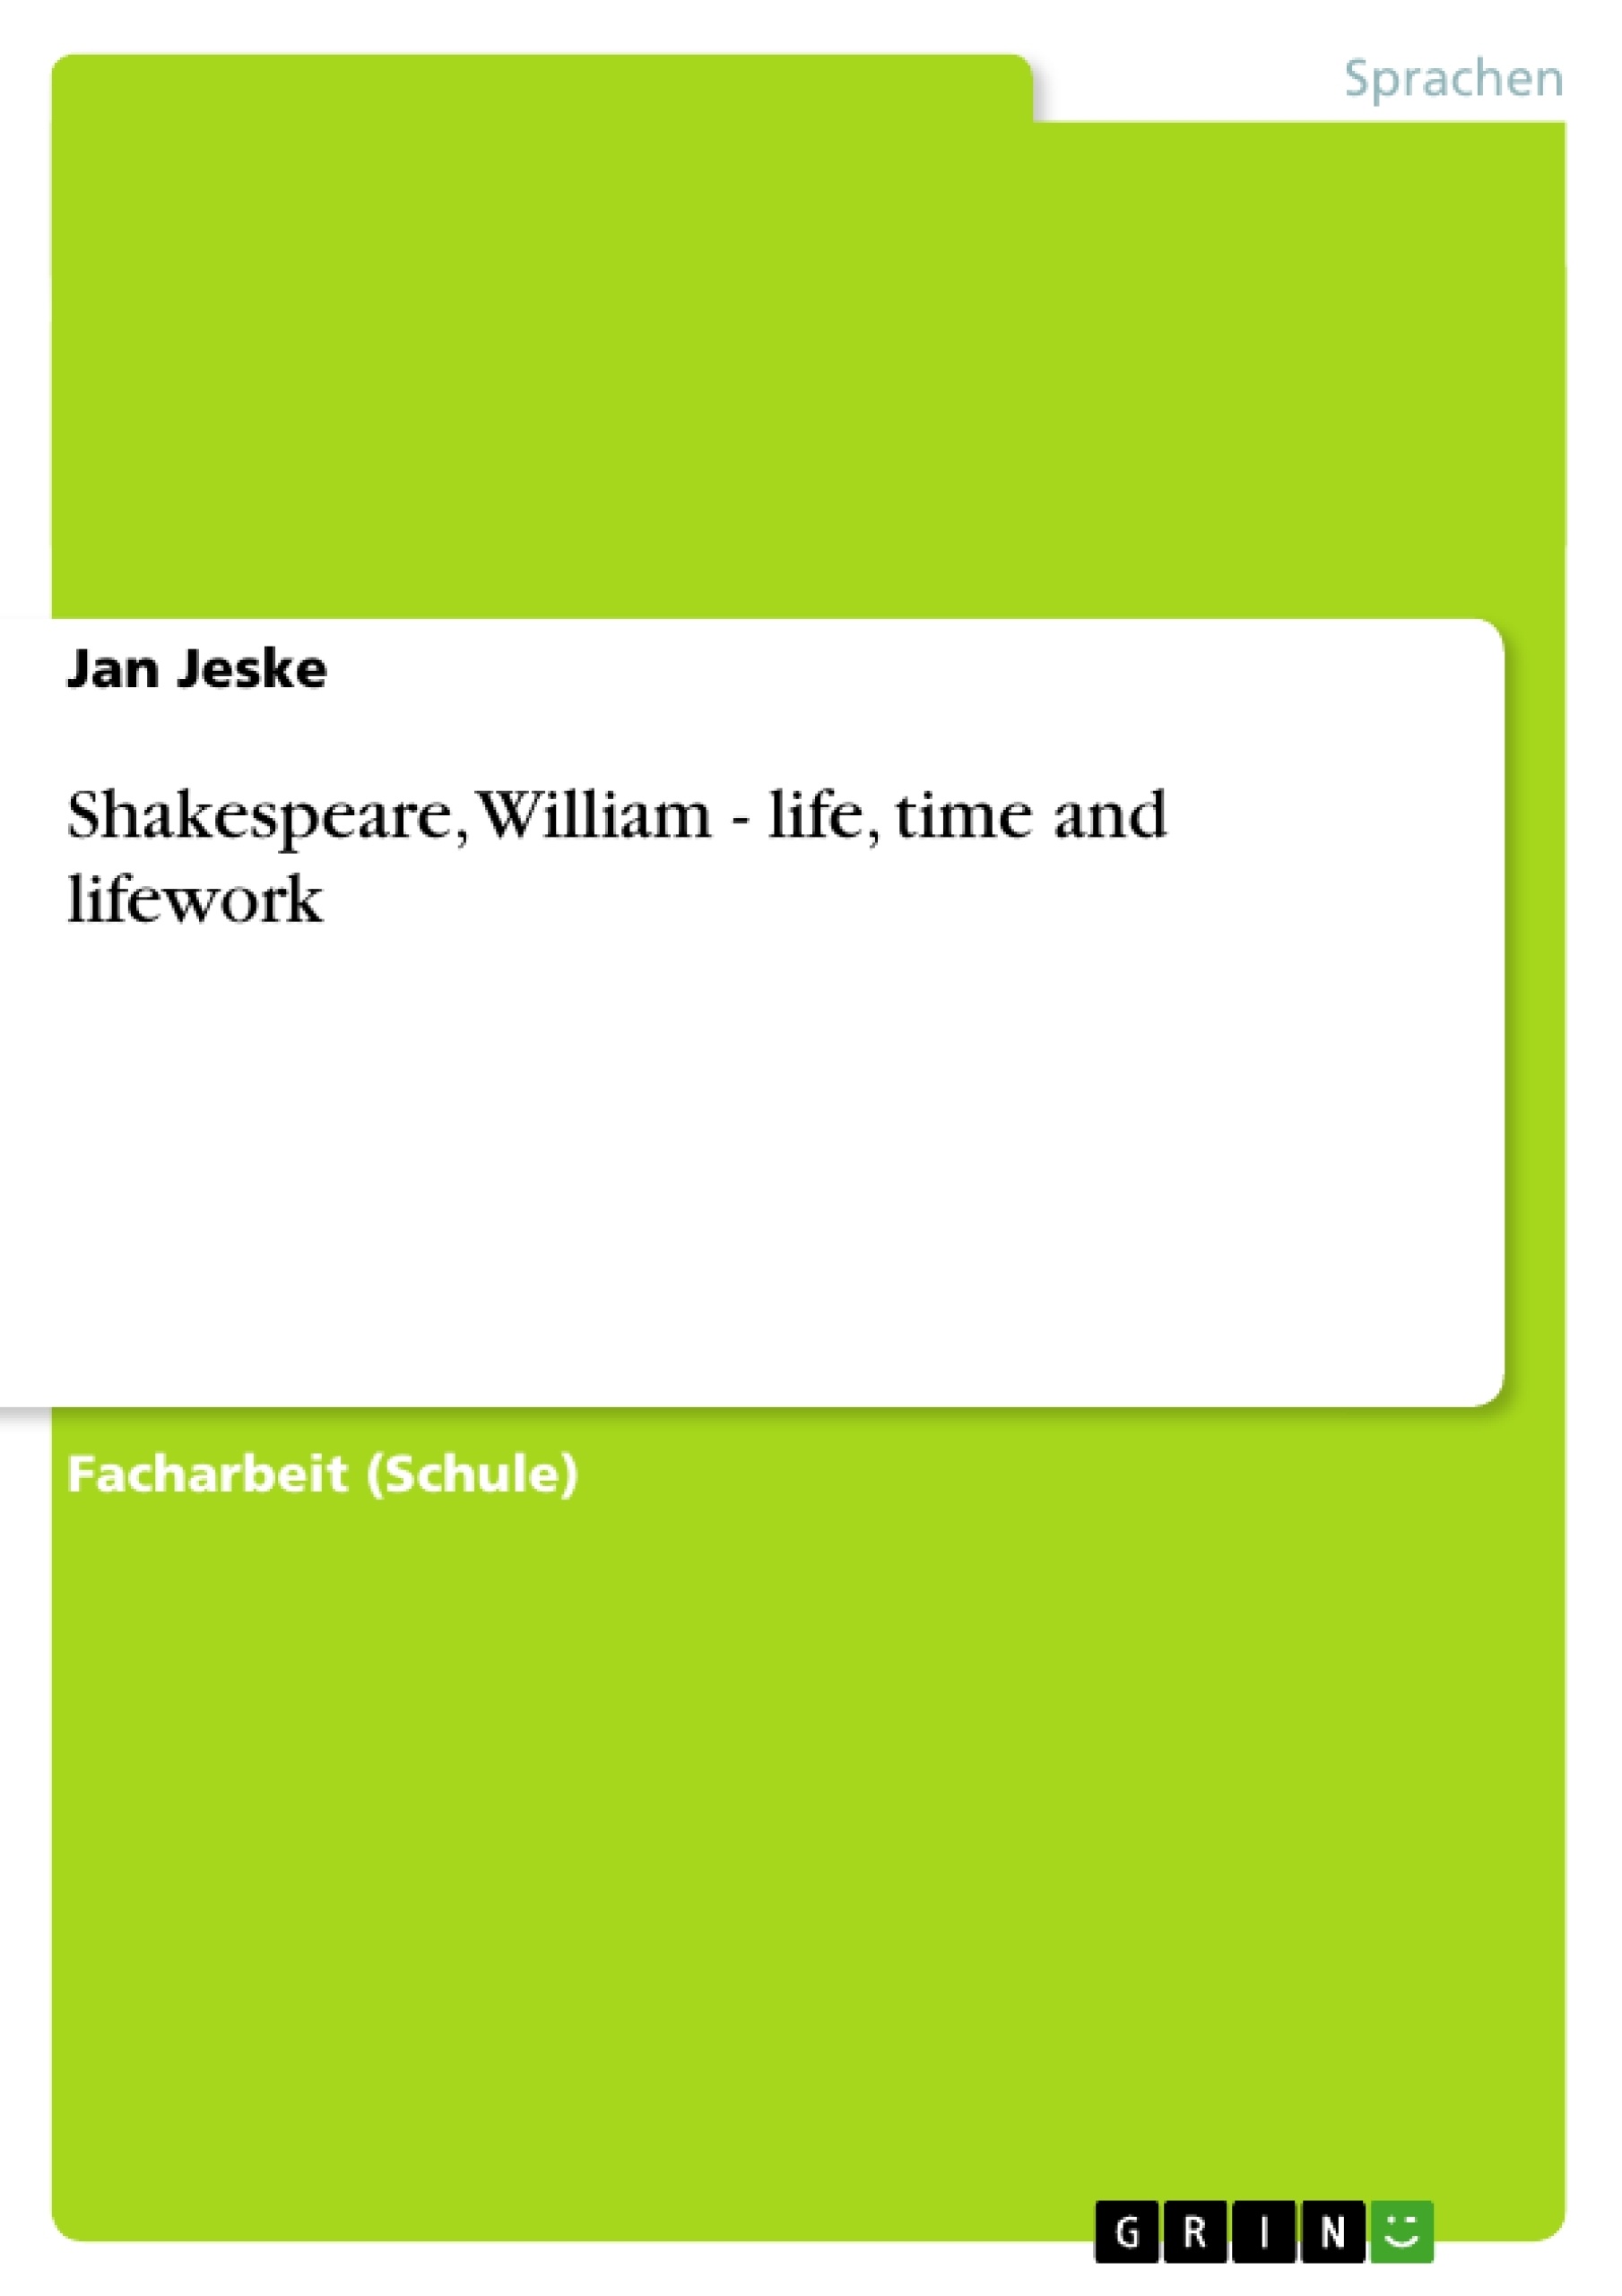 Título: Shakespeare, William - life, time and lifework